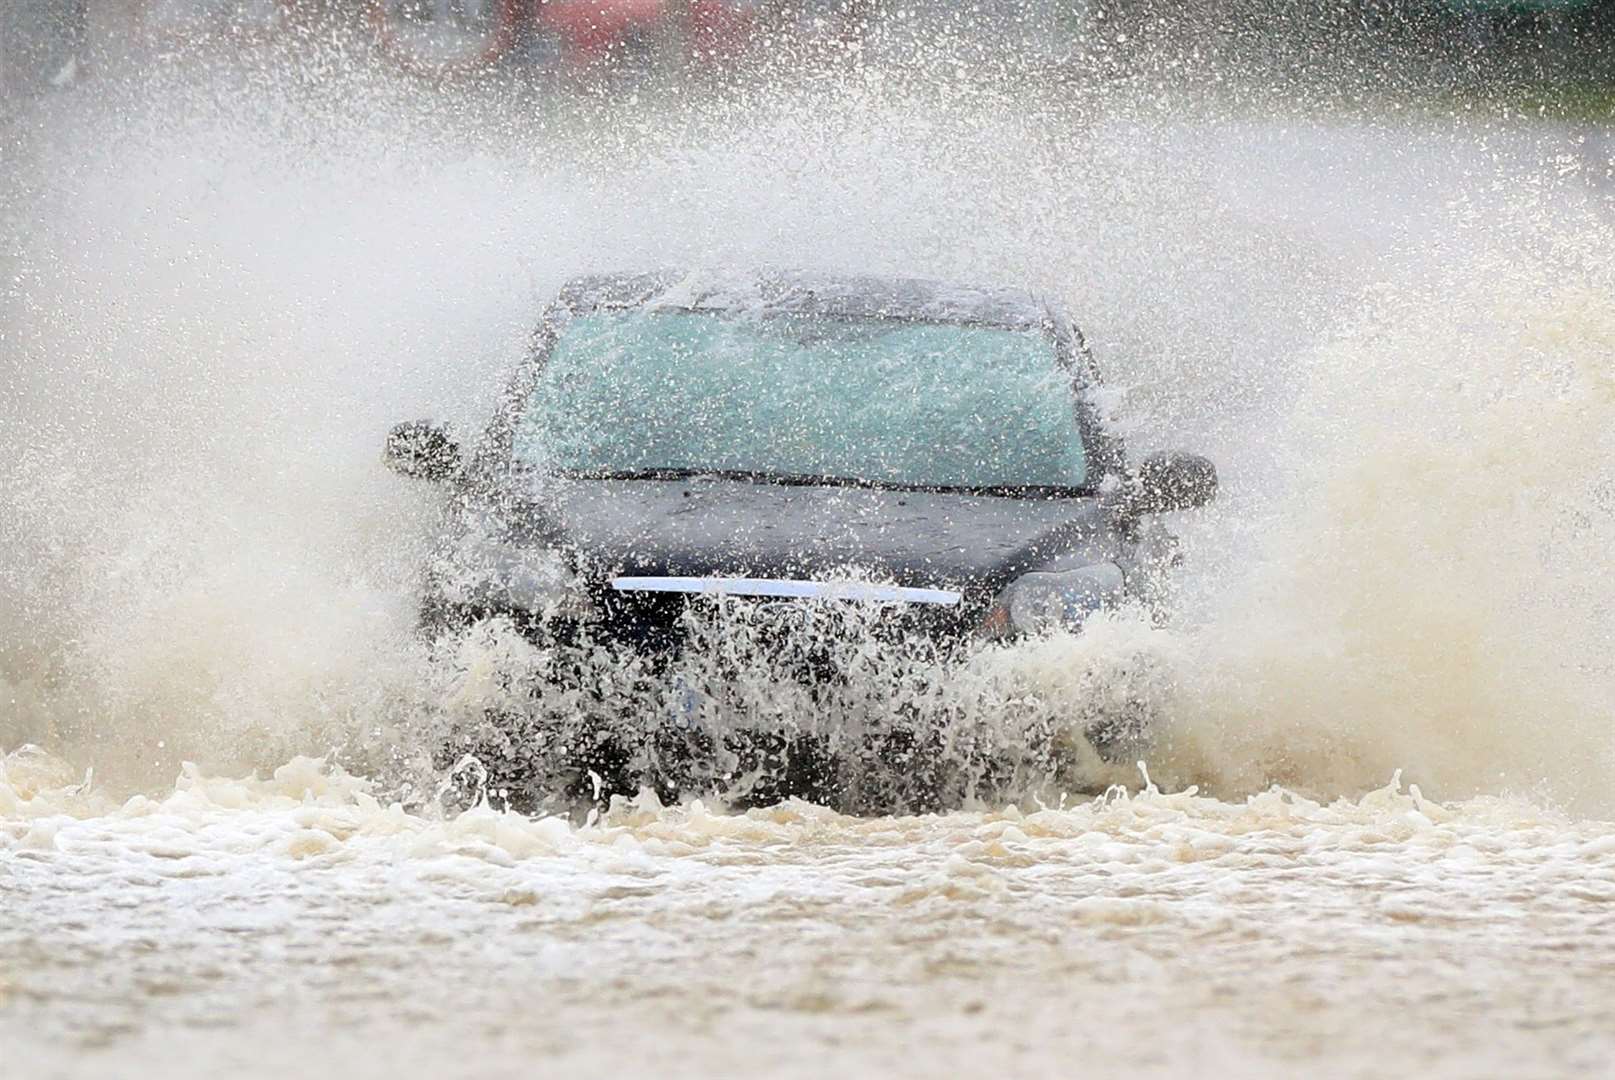 A vehicle negotiates a flooded road in Mountsorrel, Leicestershire (Mike Egerton/PA)